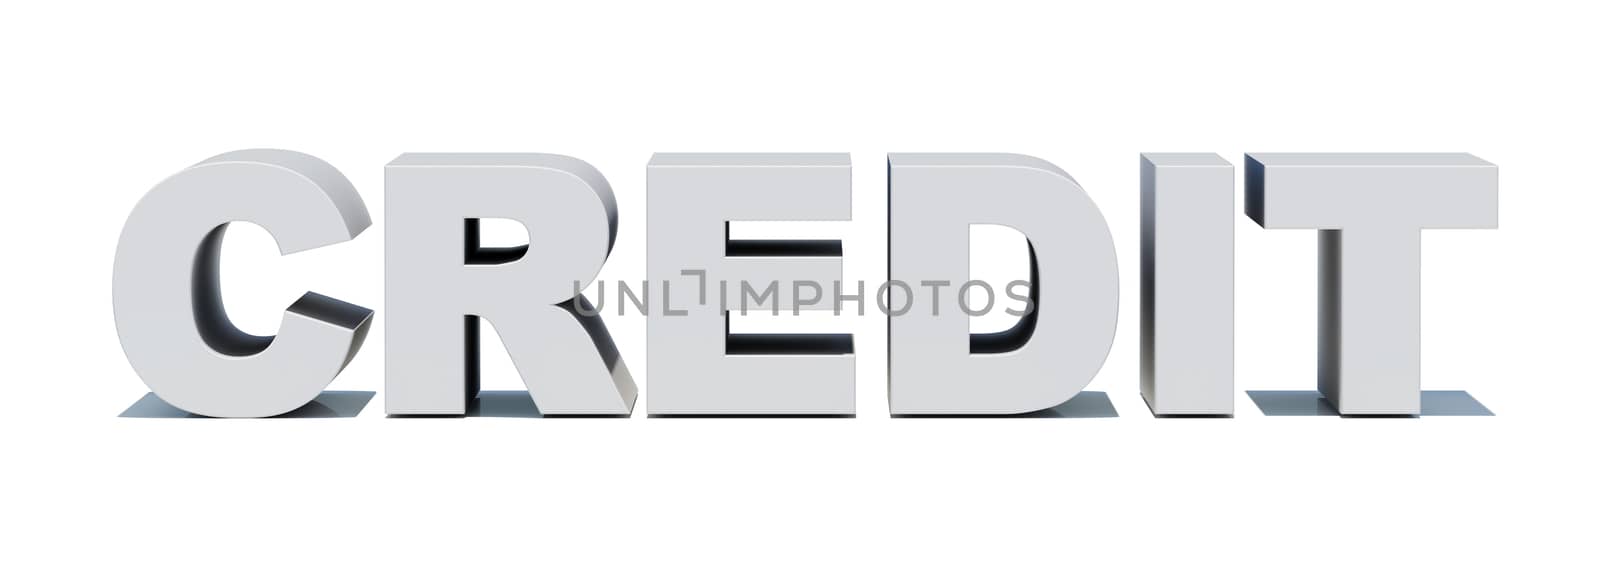 Word credit on isolated white background, front view